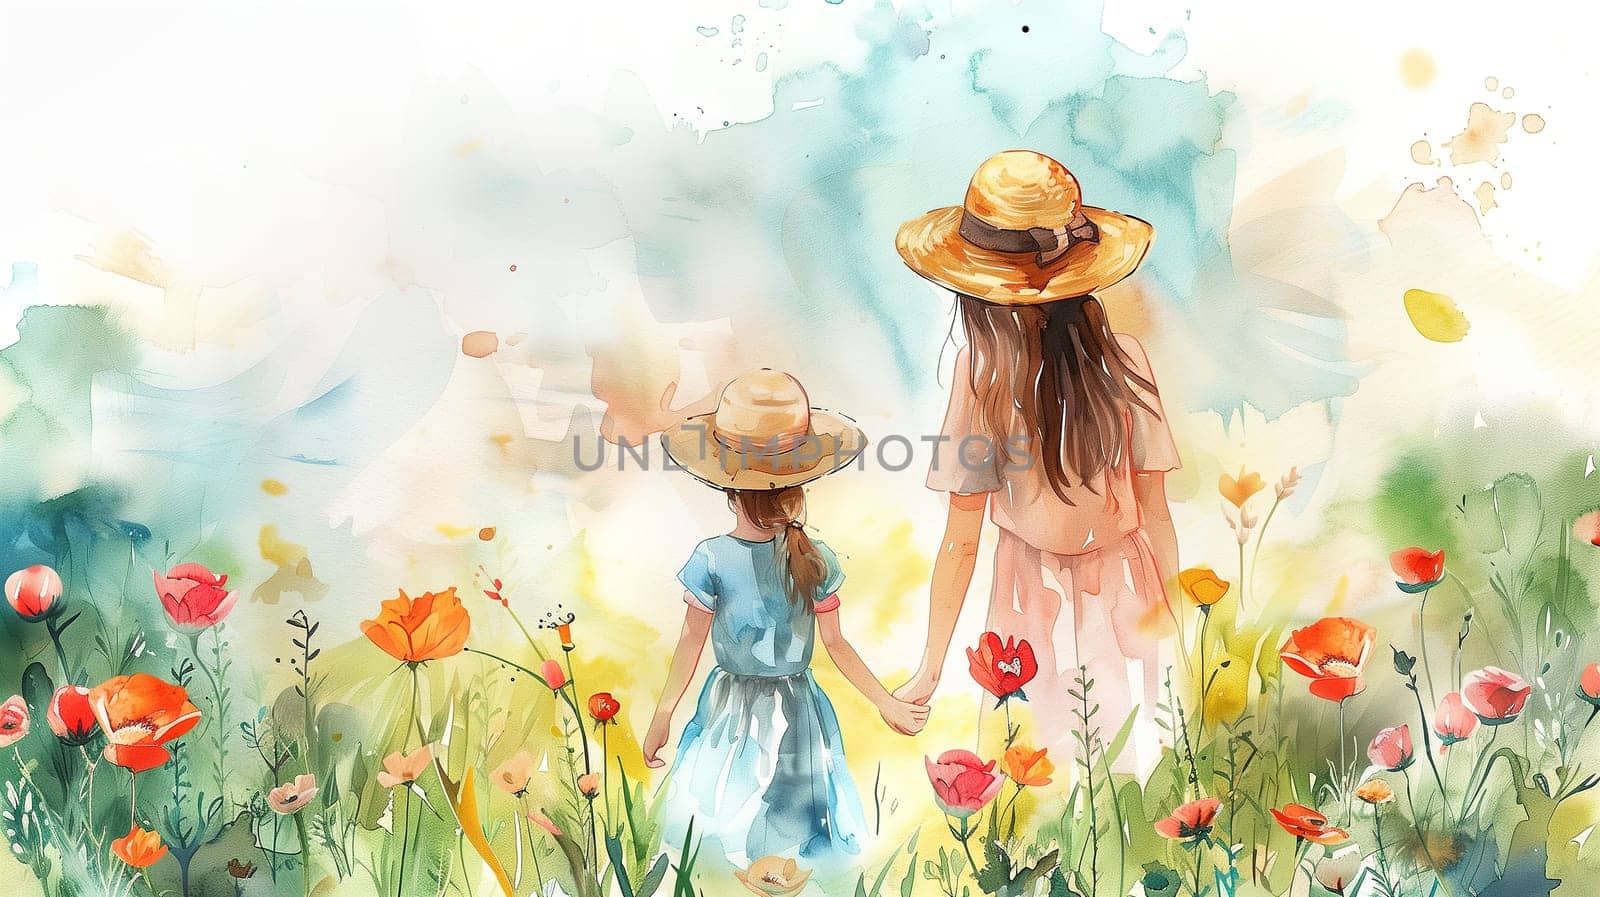 Two girls, wearing dresses, are strolling through a vibrant field of colorful flowers. The girls are hand in hand, enjoying the beauty of the surroundings under the clear sky.